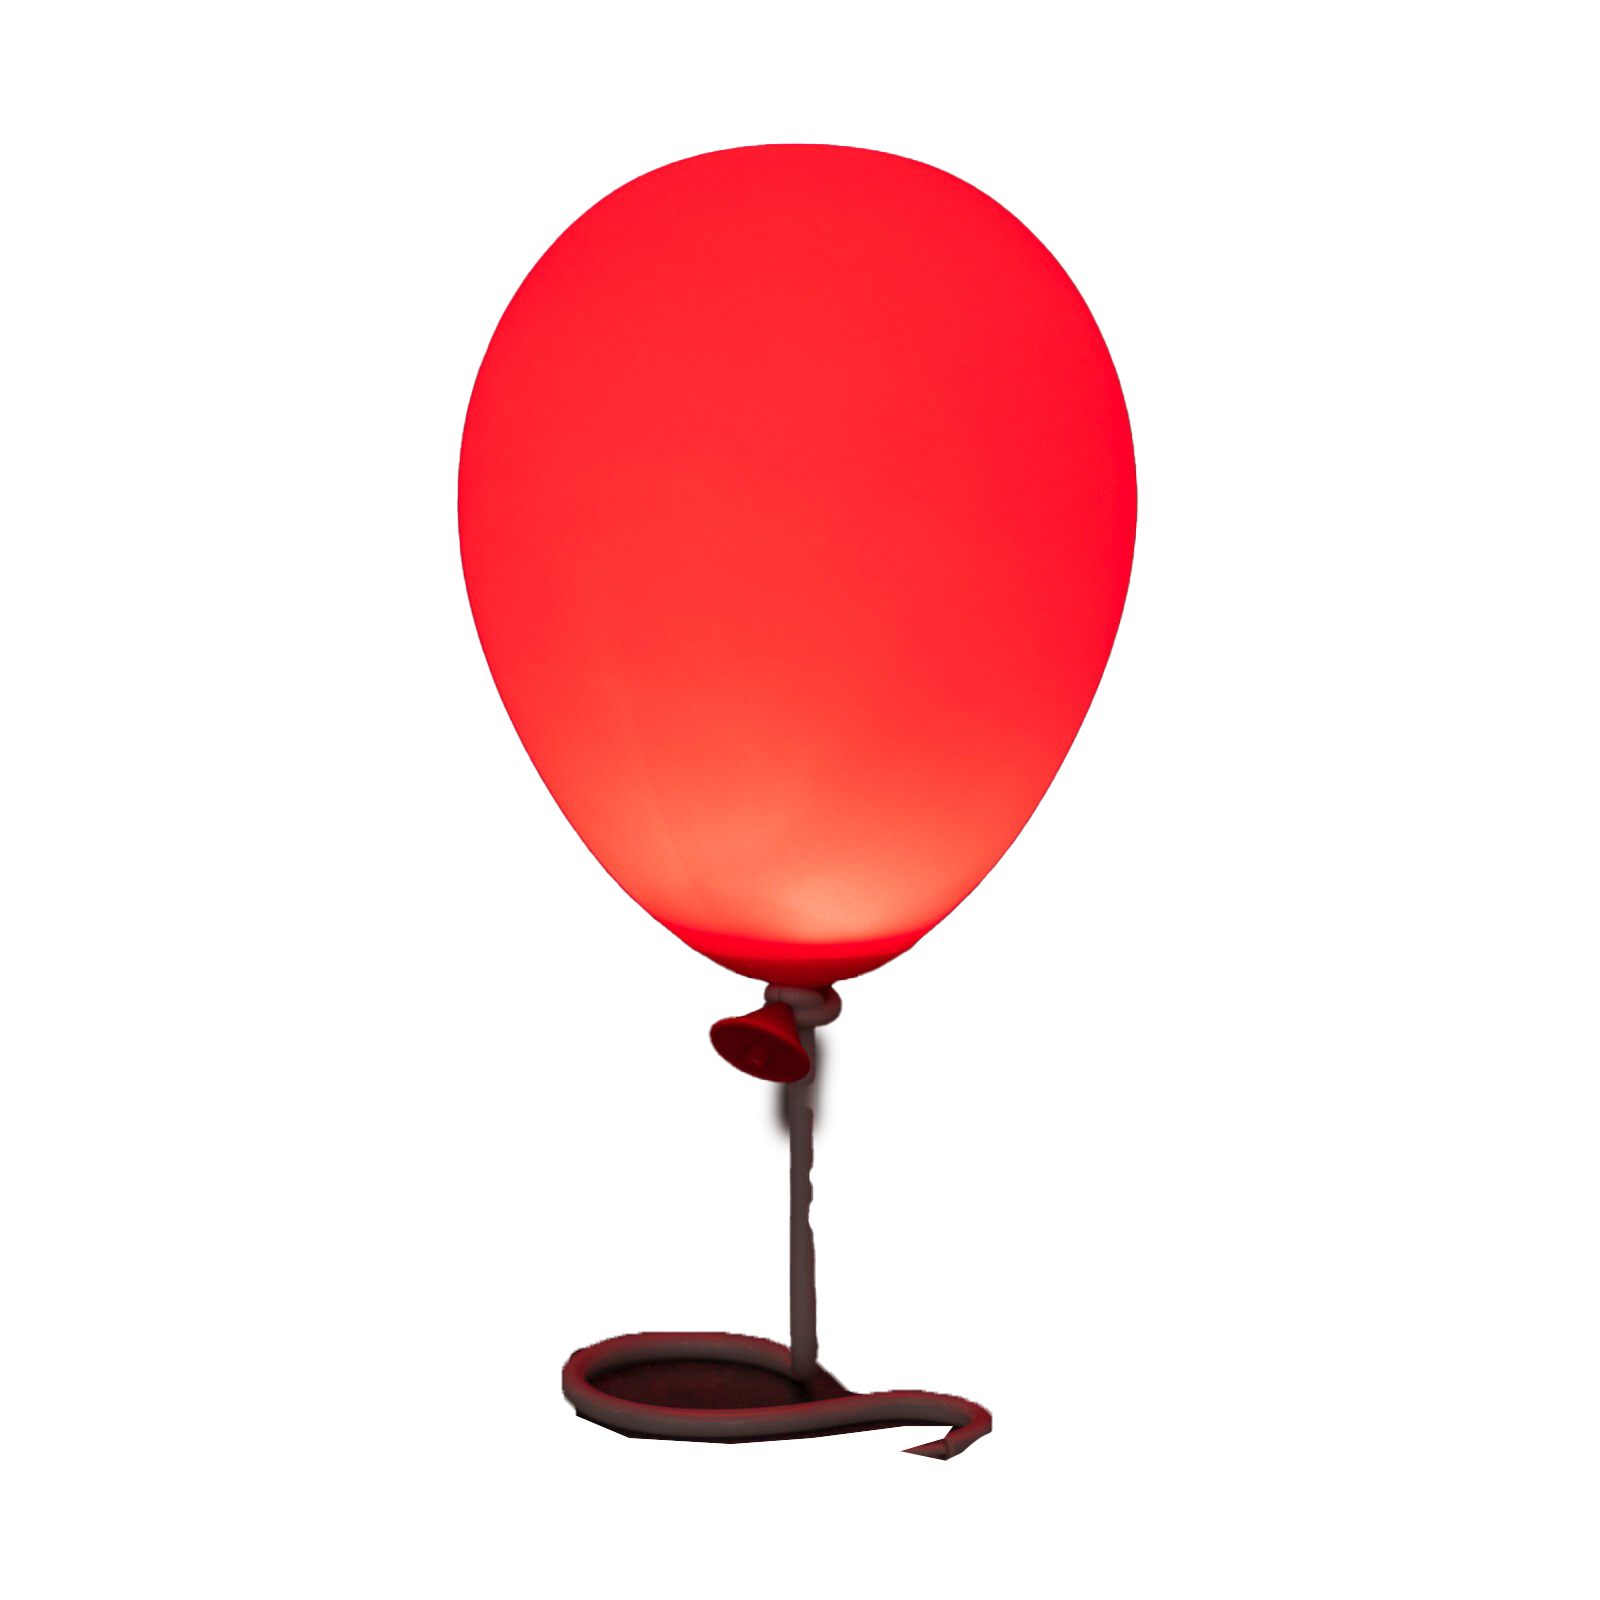 Pennywise Balloon PNG Free Download